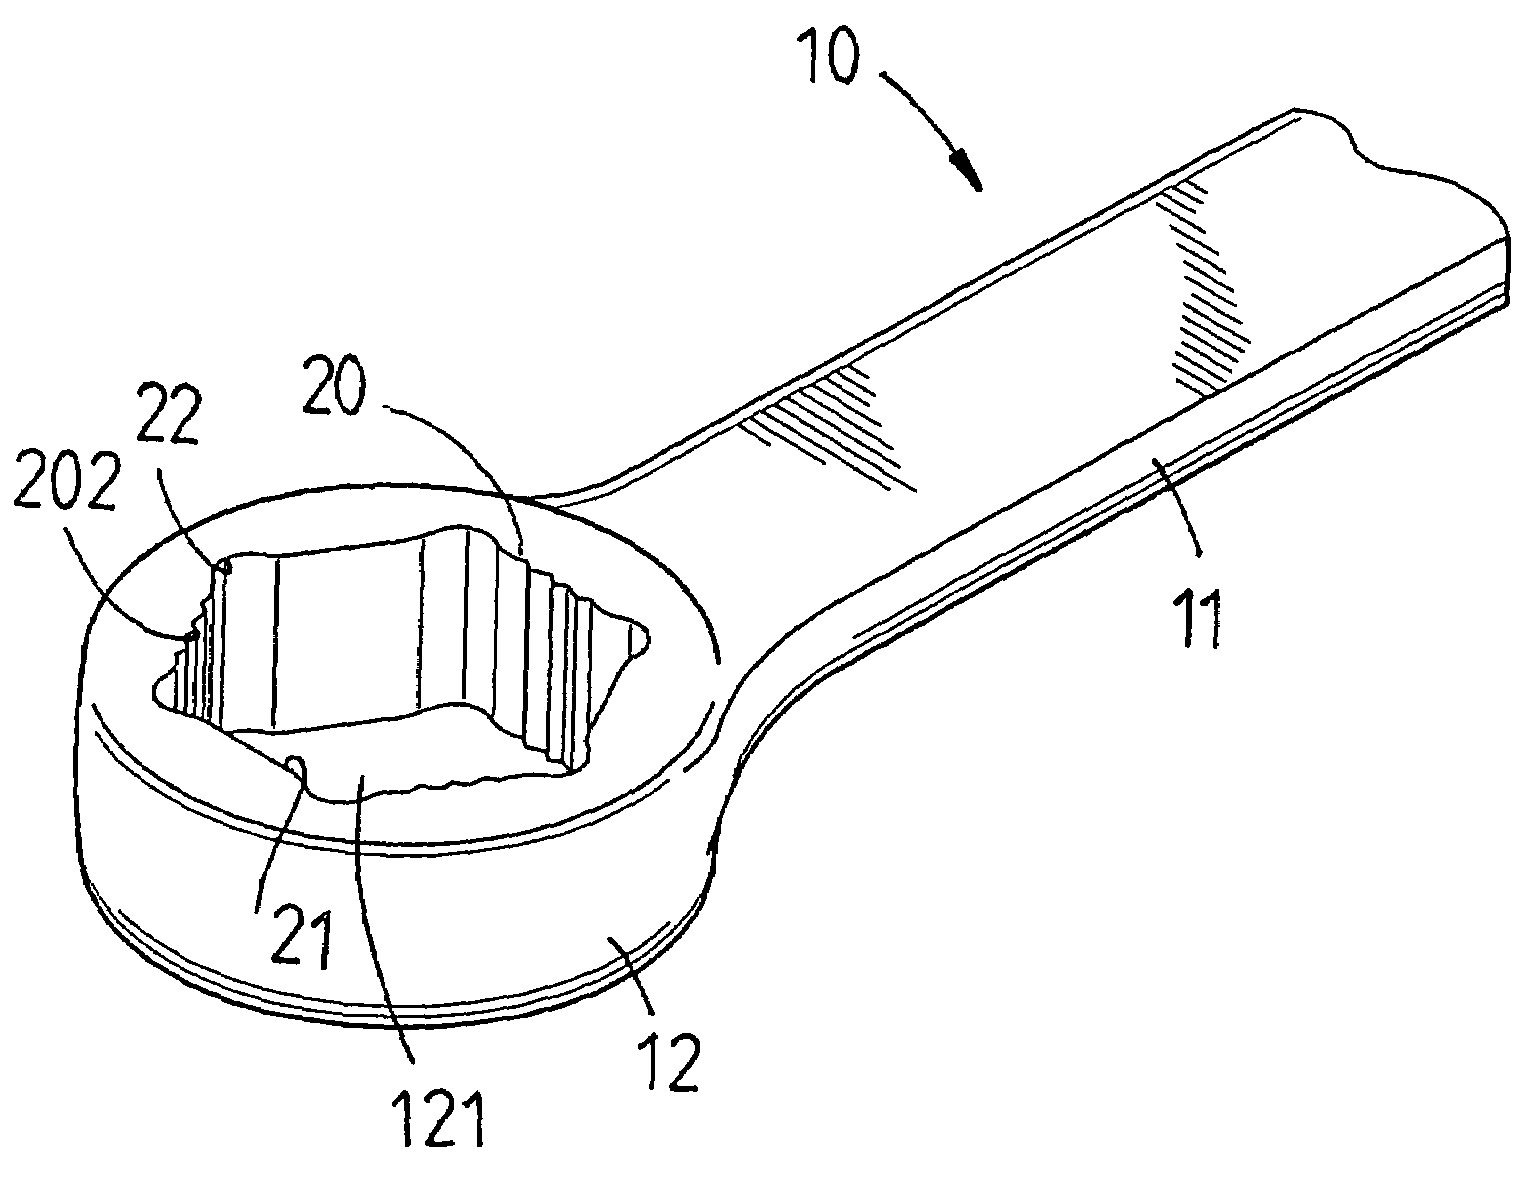 Clamping device for providing high twisting forces and low damage to screw device